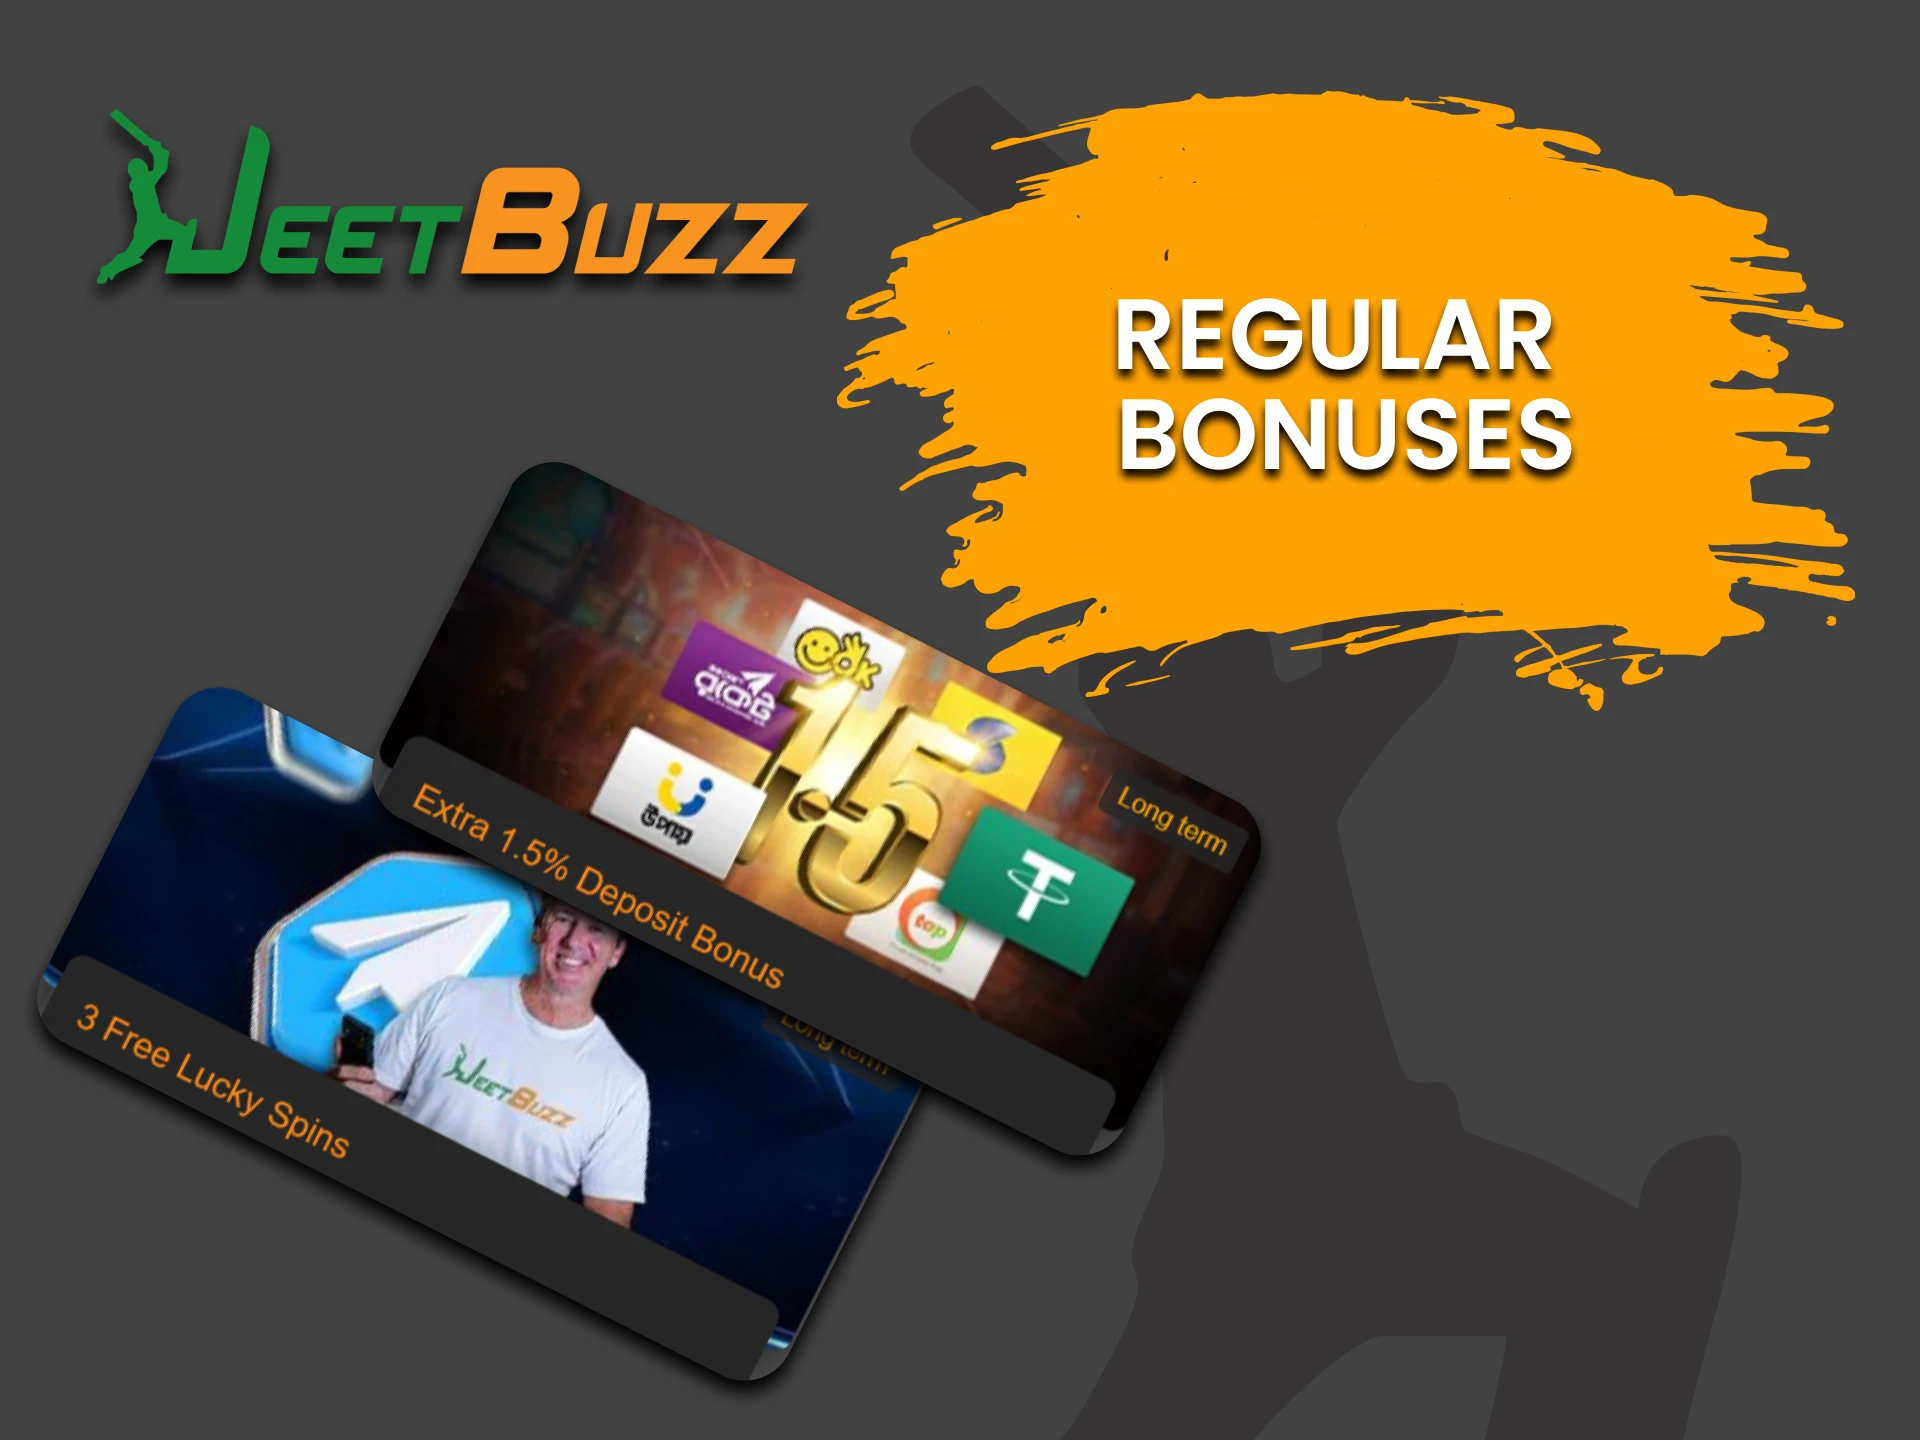 JeetBuzz has a variety of bonuses for Poker players.